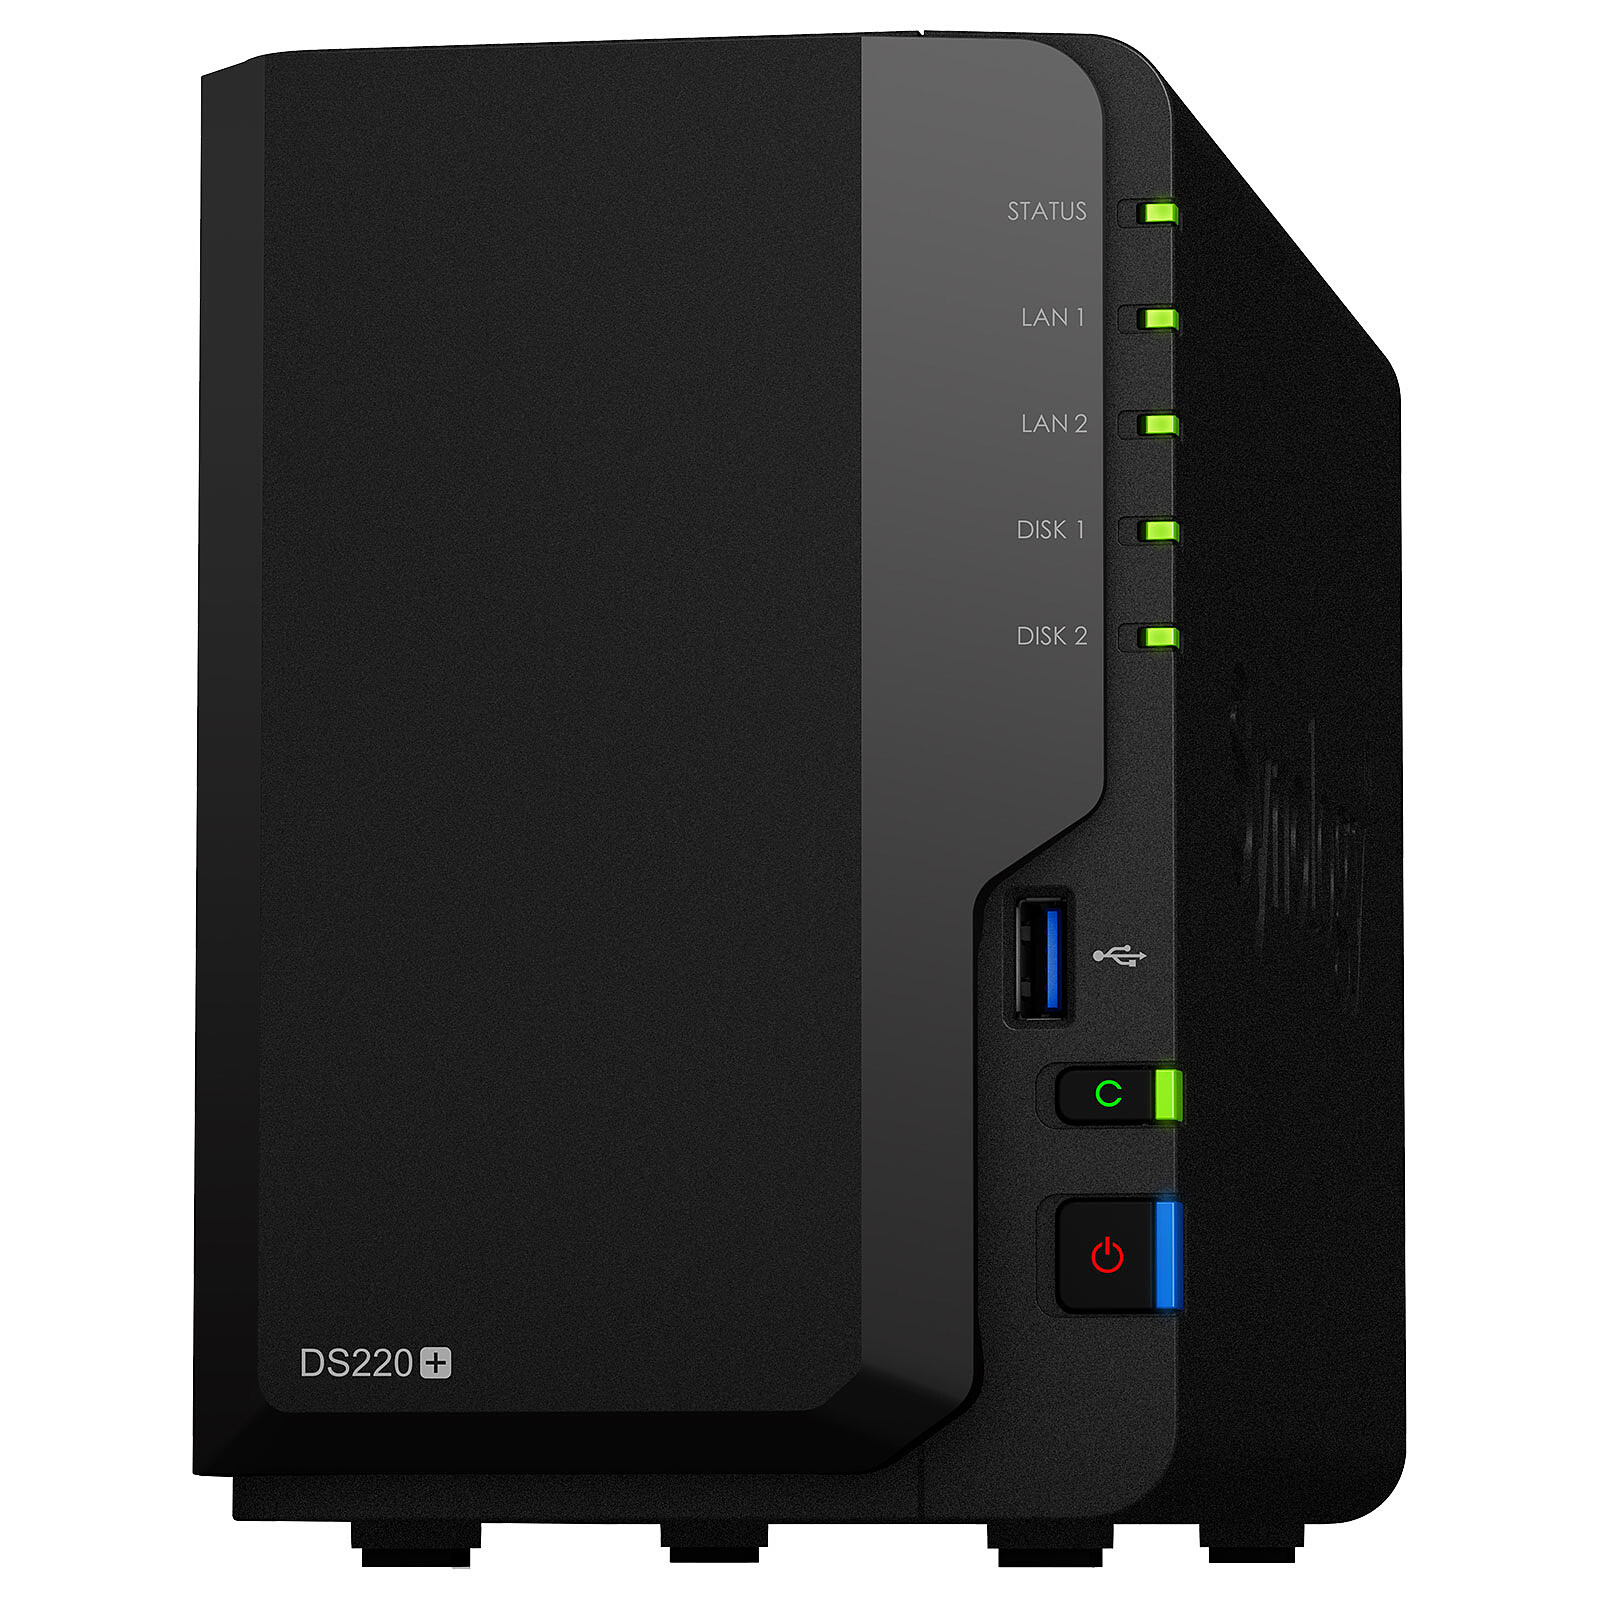 Synology DiskStation DS224+ - 2 Baies - Serveur NAS Synology